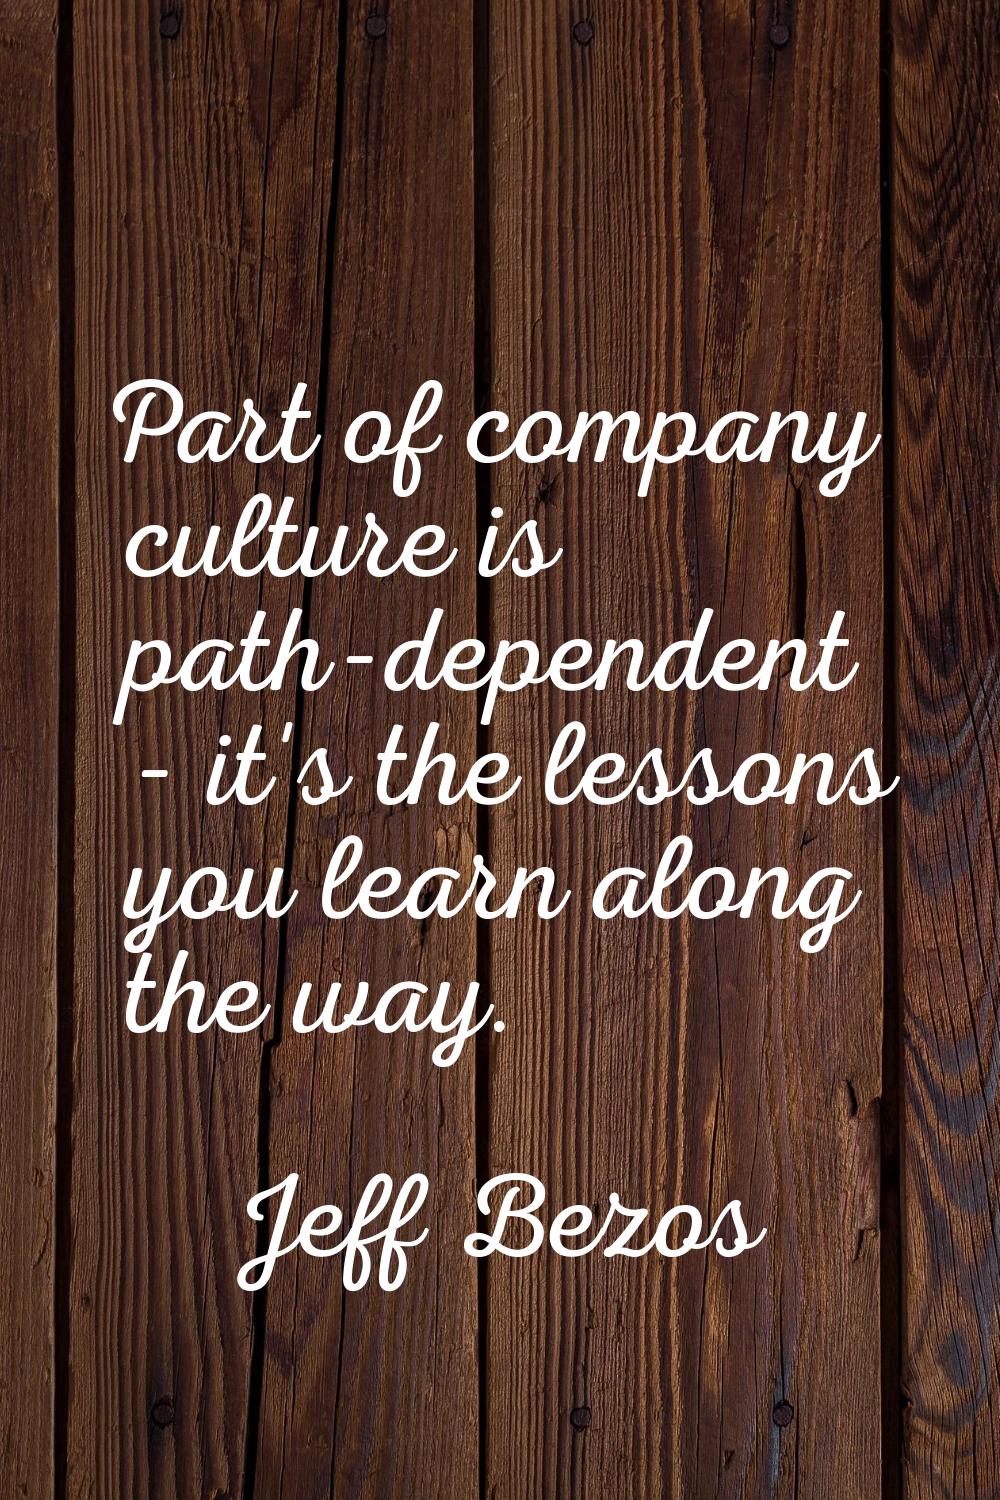 Part of company culture is path-dependent - it's the lessons you learn along the way.